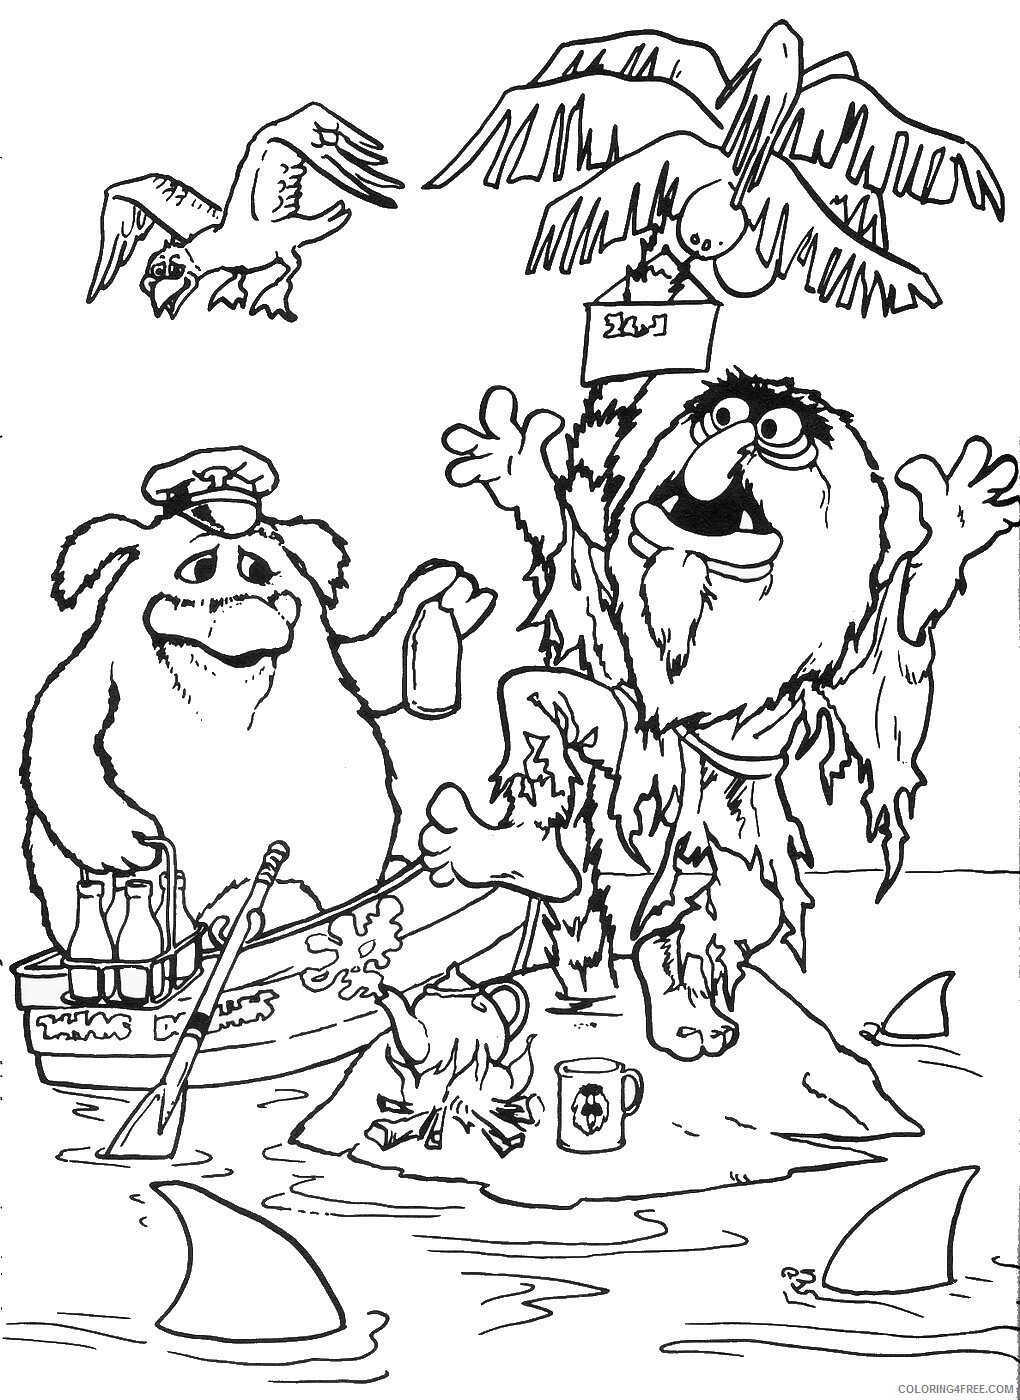 The Muppet Show Coloring Pages TV Film muppets_cl_20 Printable 2020 09379 Coloring4free